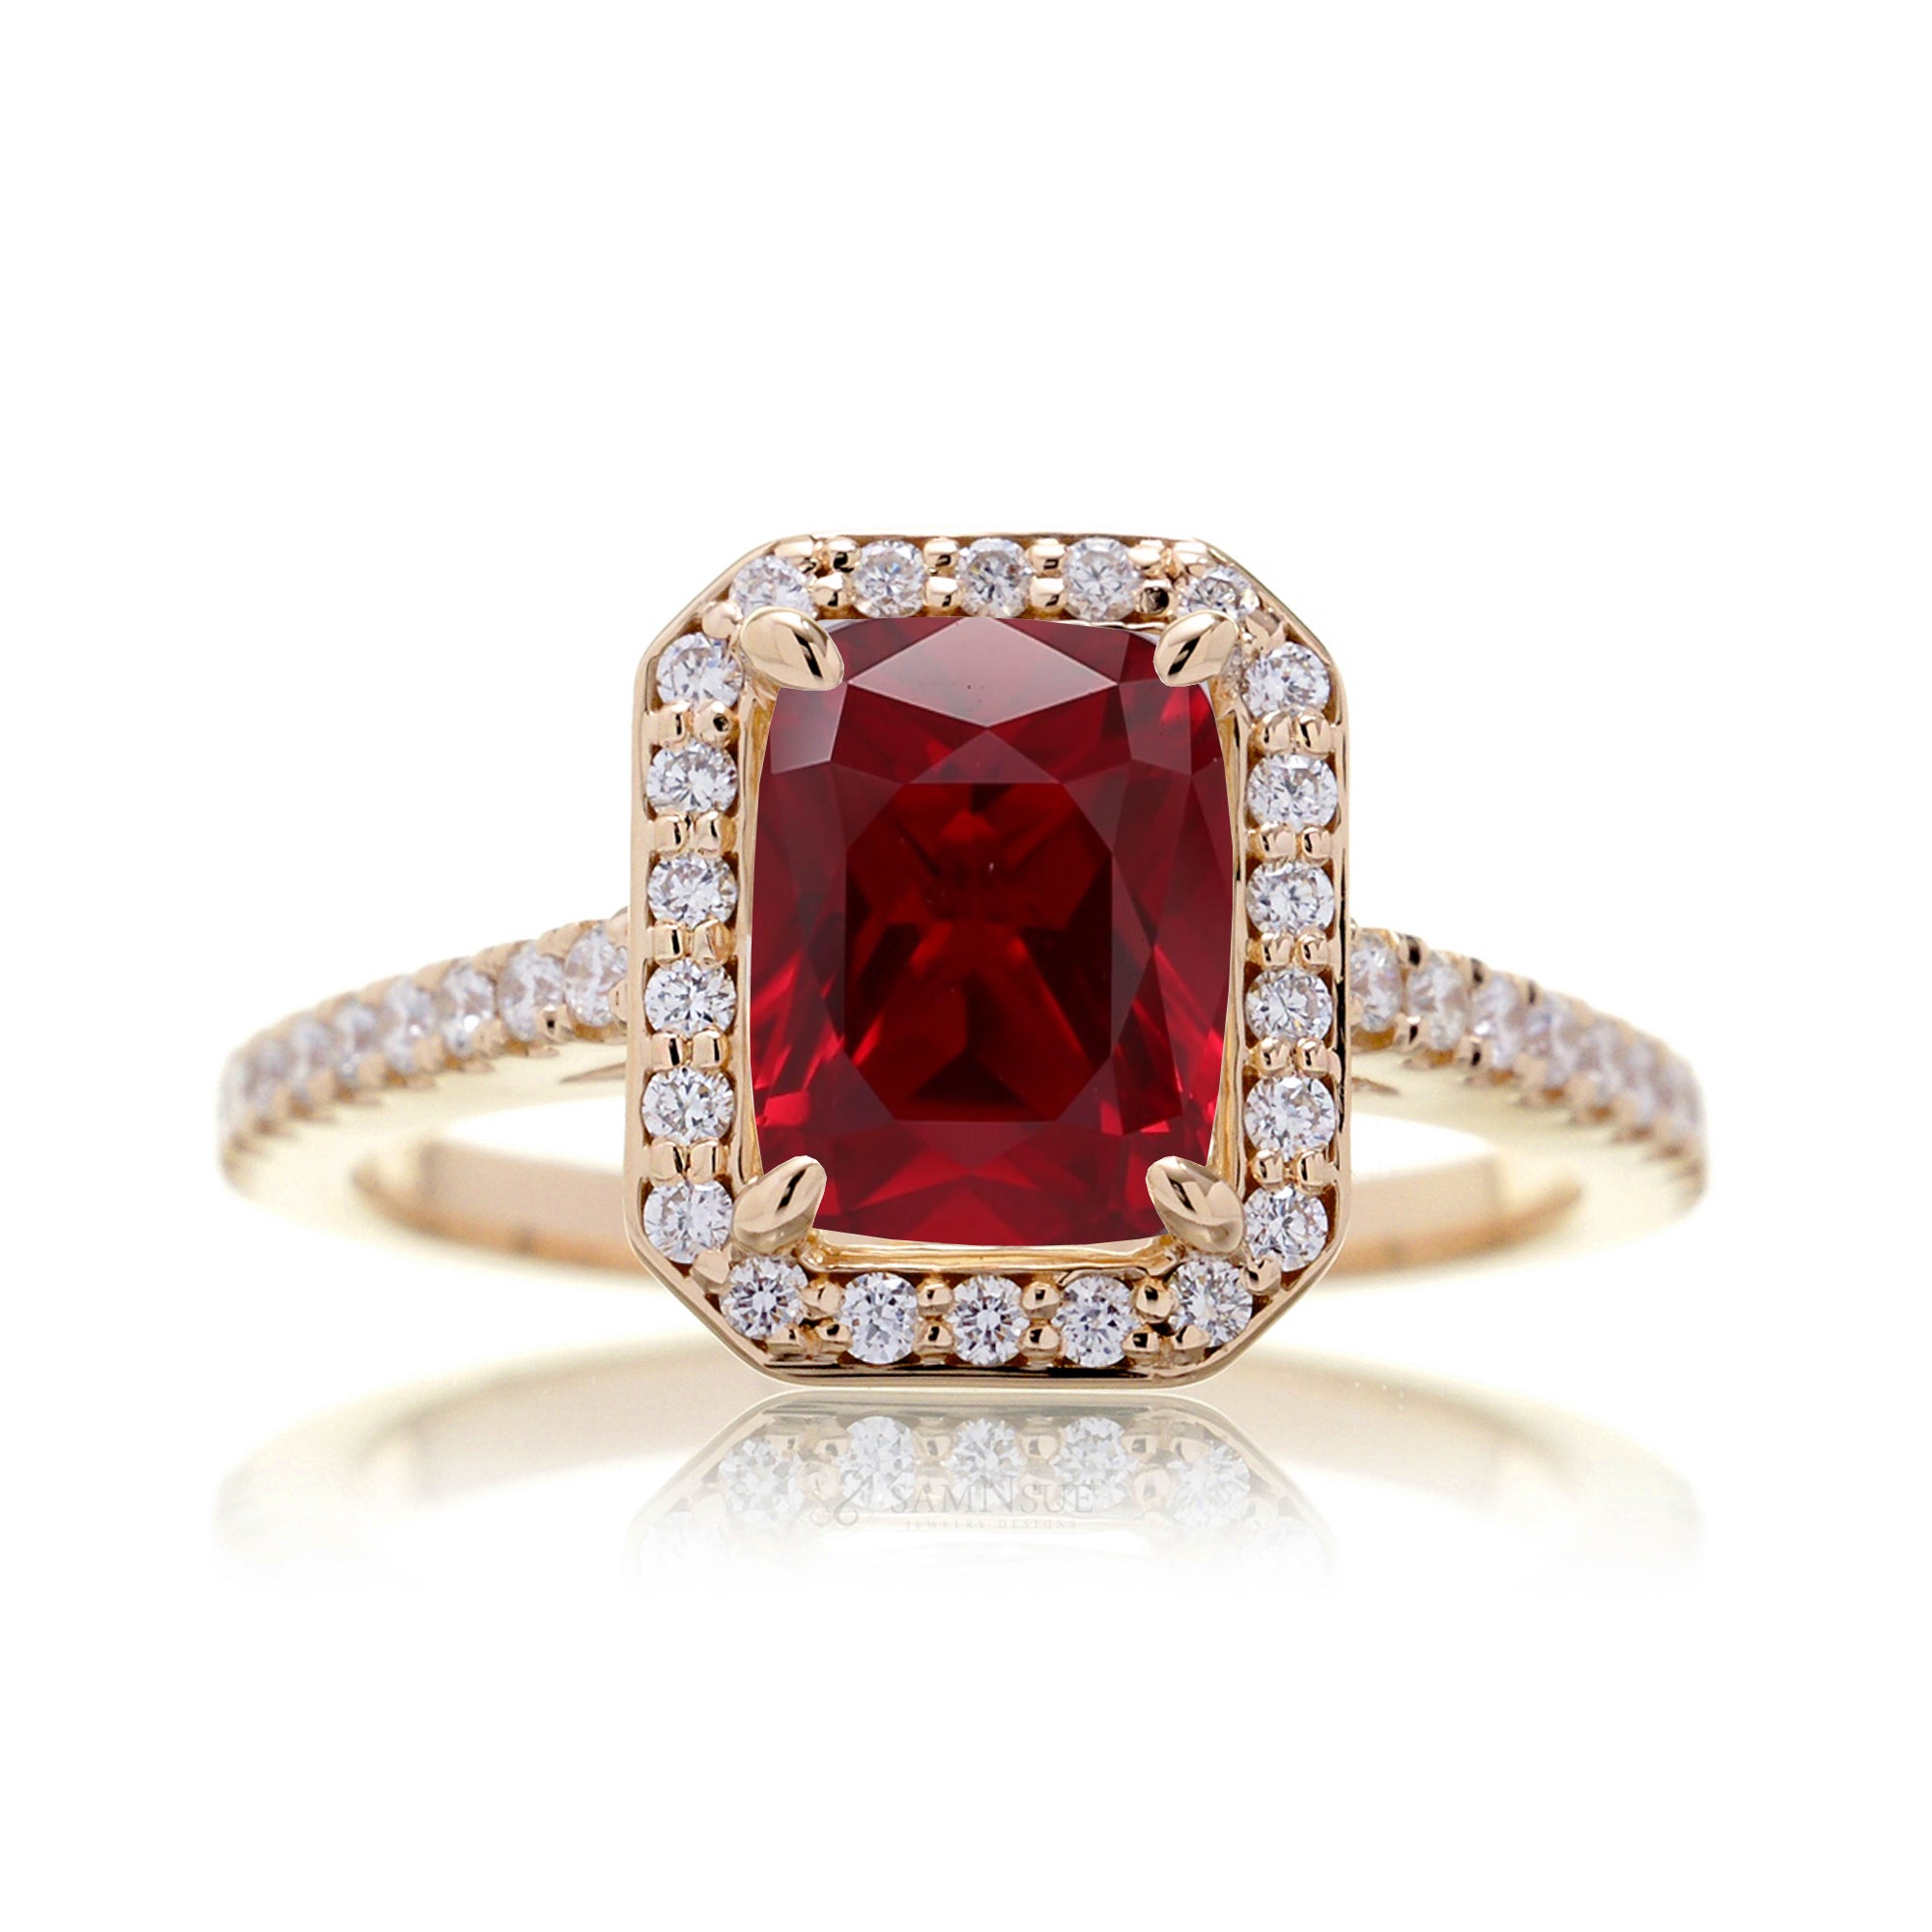 Cushion lab-grown ruby diamond halo cathedral engagement ring - the Steffy rose gold